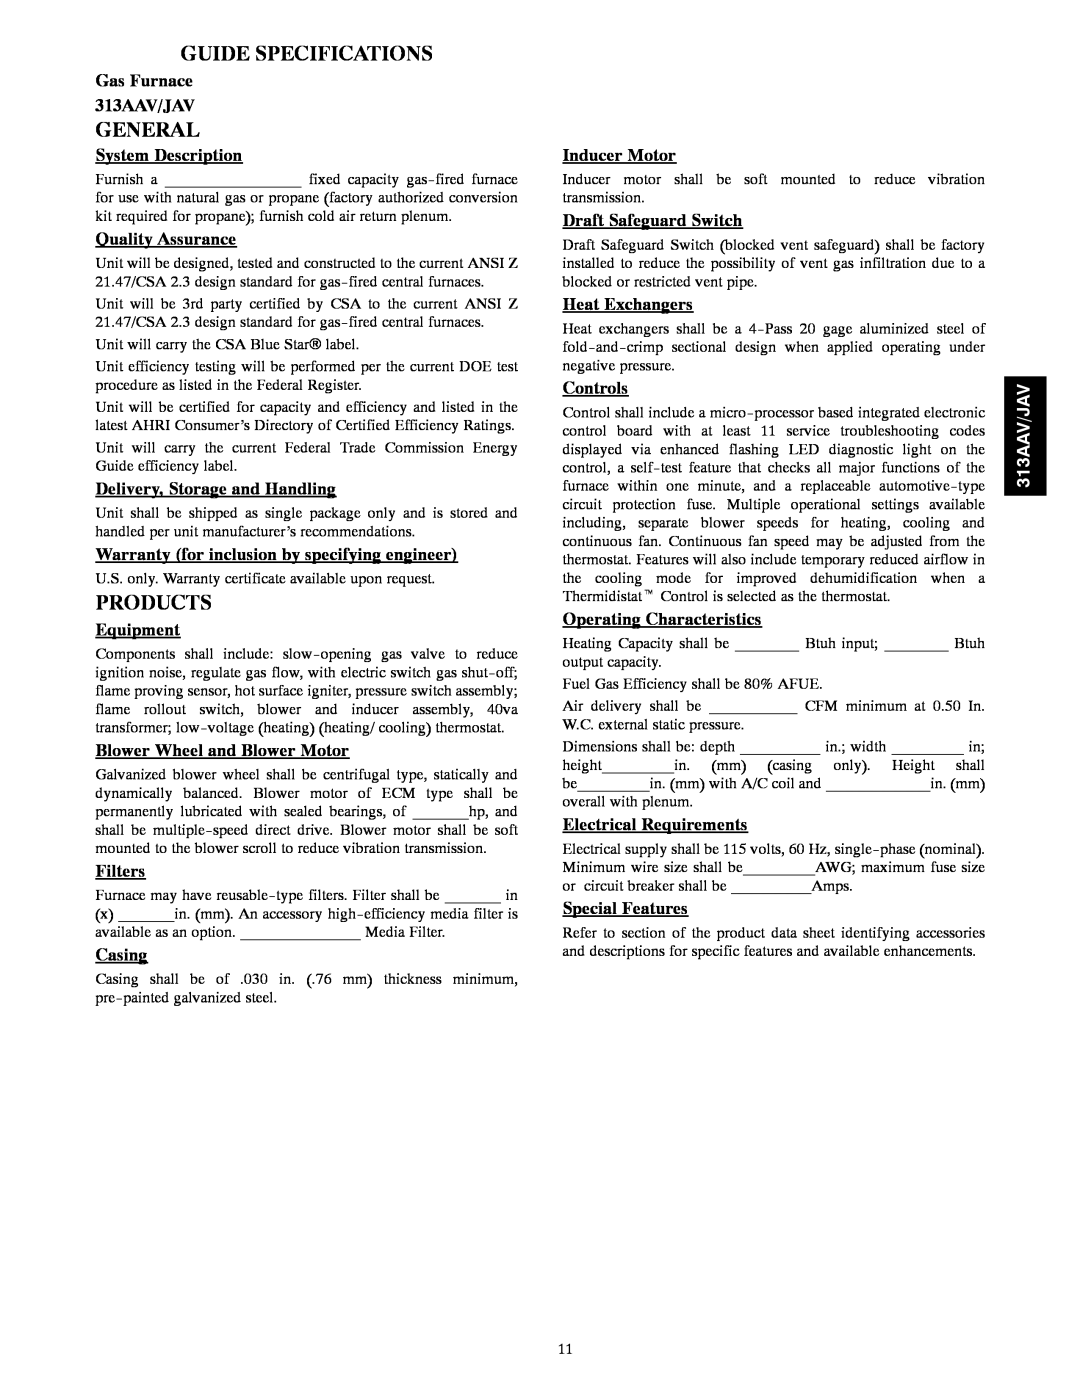 Bryant manual Guide Specifications, General, Products, 313AAV/JAV 